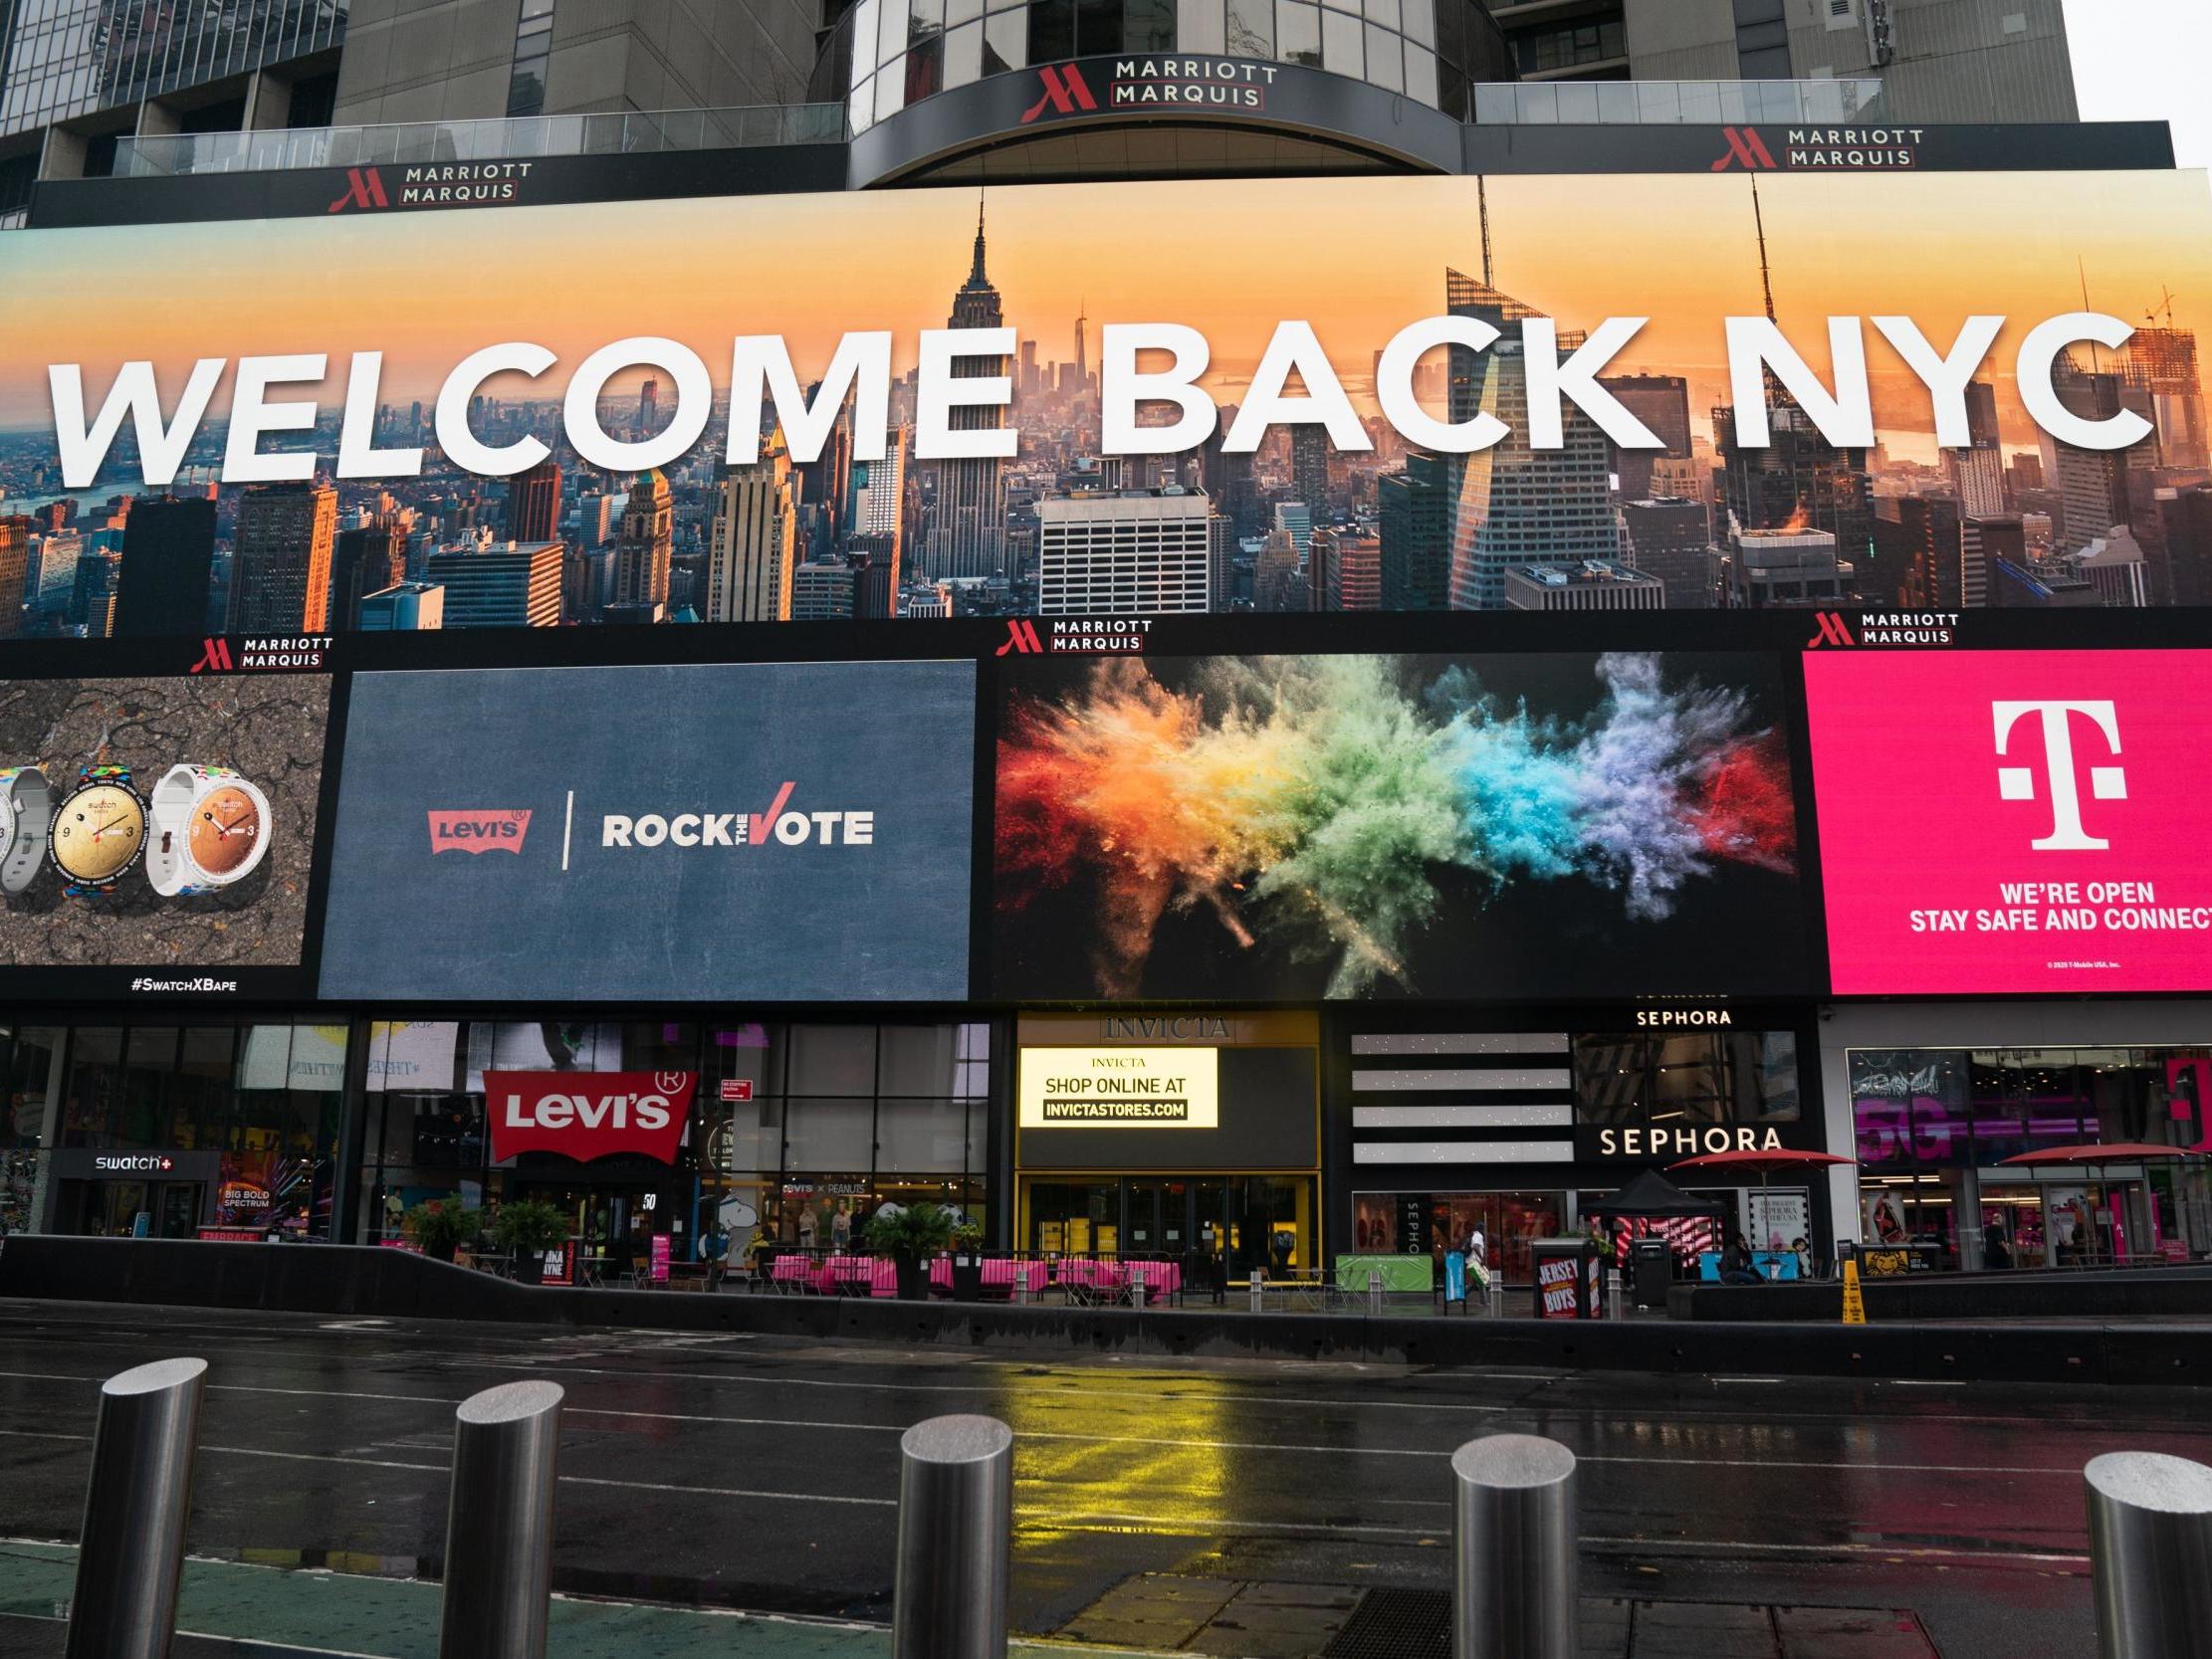 A billboard welcomes people back to New York City in Times Square five months after it shut down to combat the coronavirus